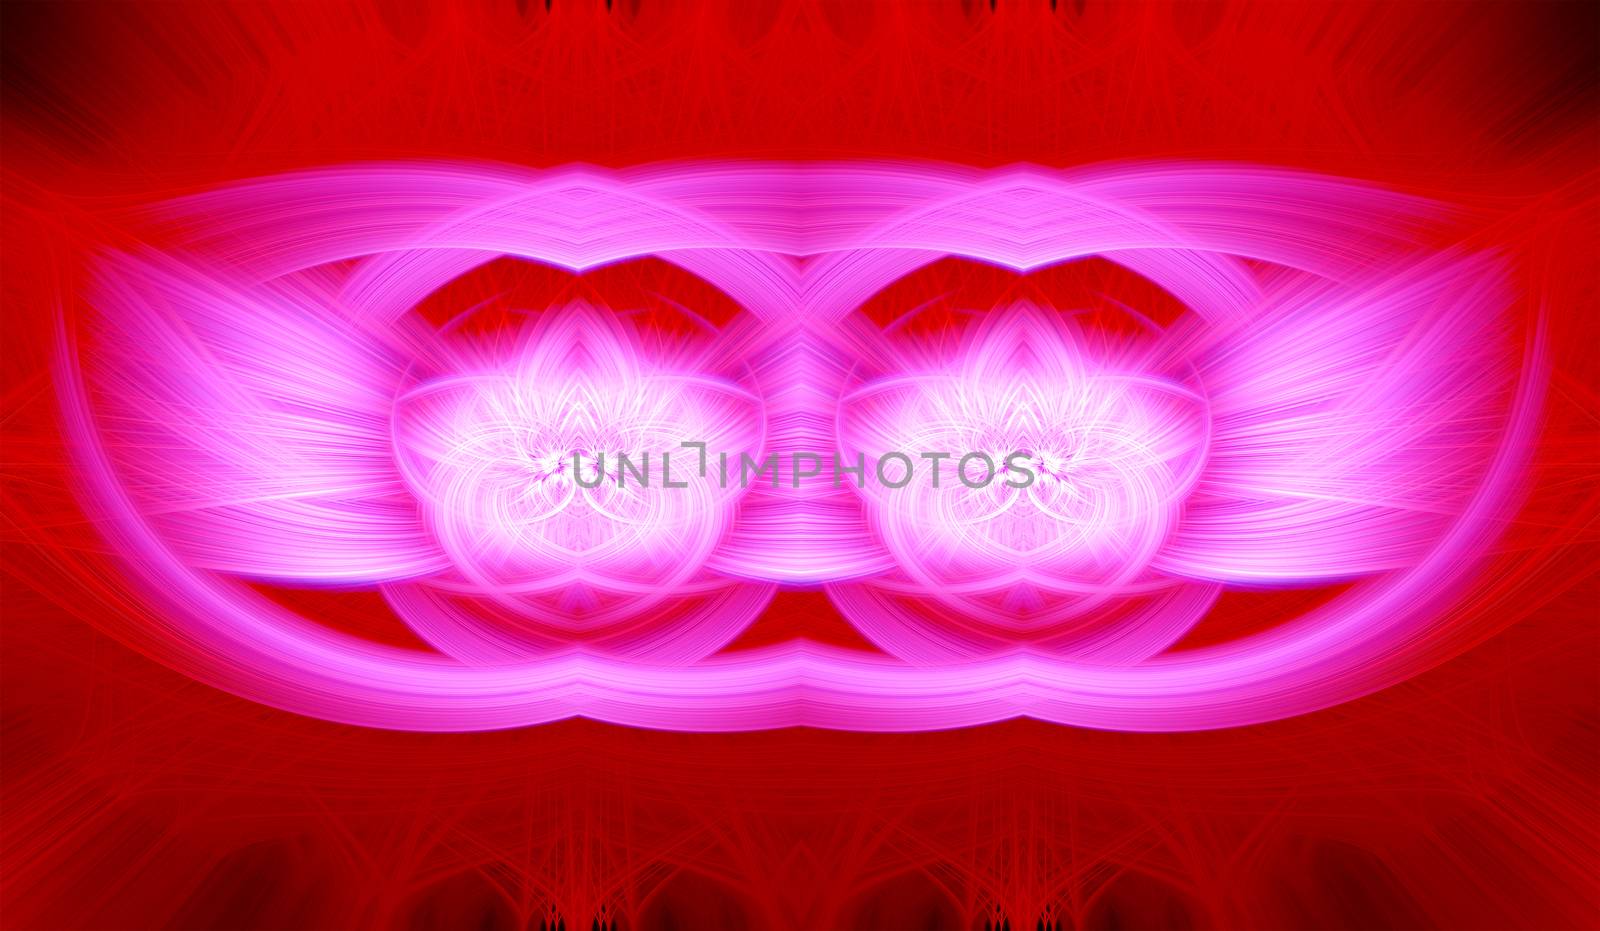 Beautiful abstract intertwined glowing 3d fibers forming a shape of sparkle, flame, flower, interlinked hearts. Maroon, white, red, and pink colors. Banner size. Illustration.